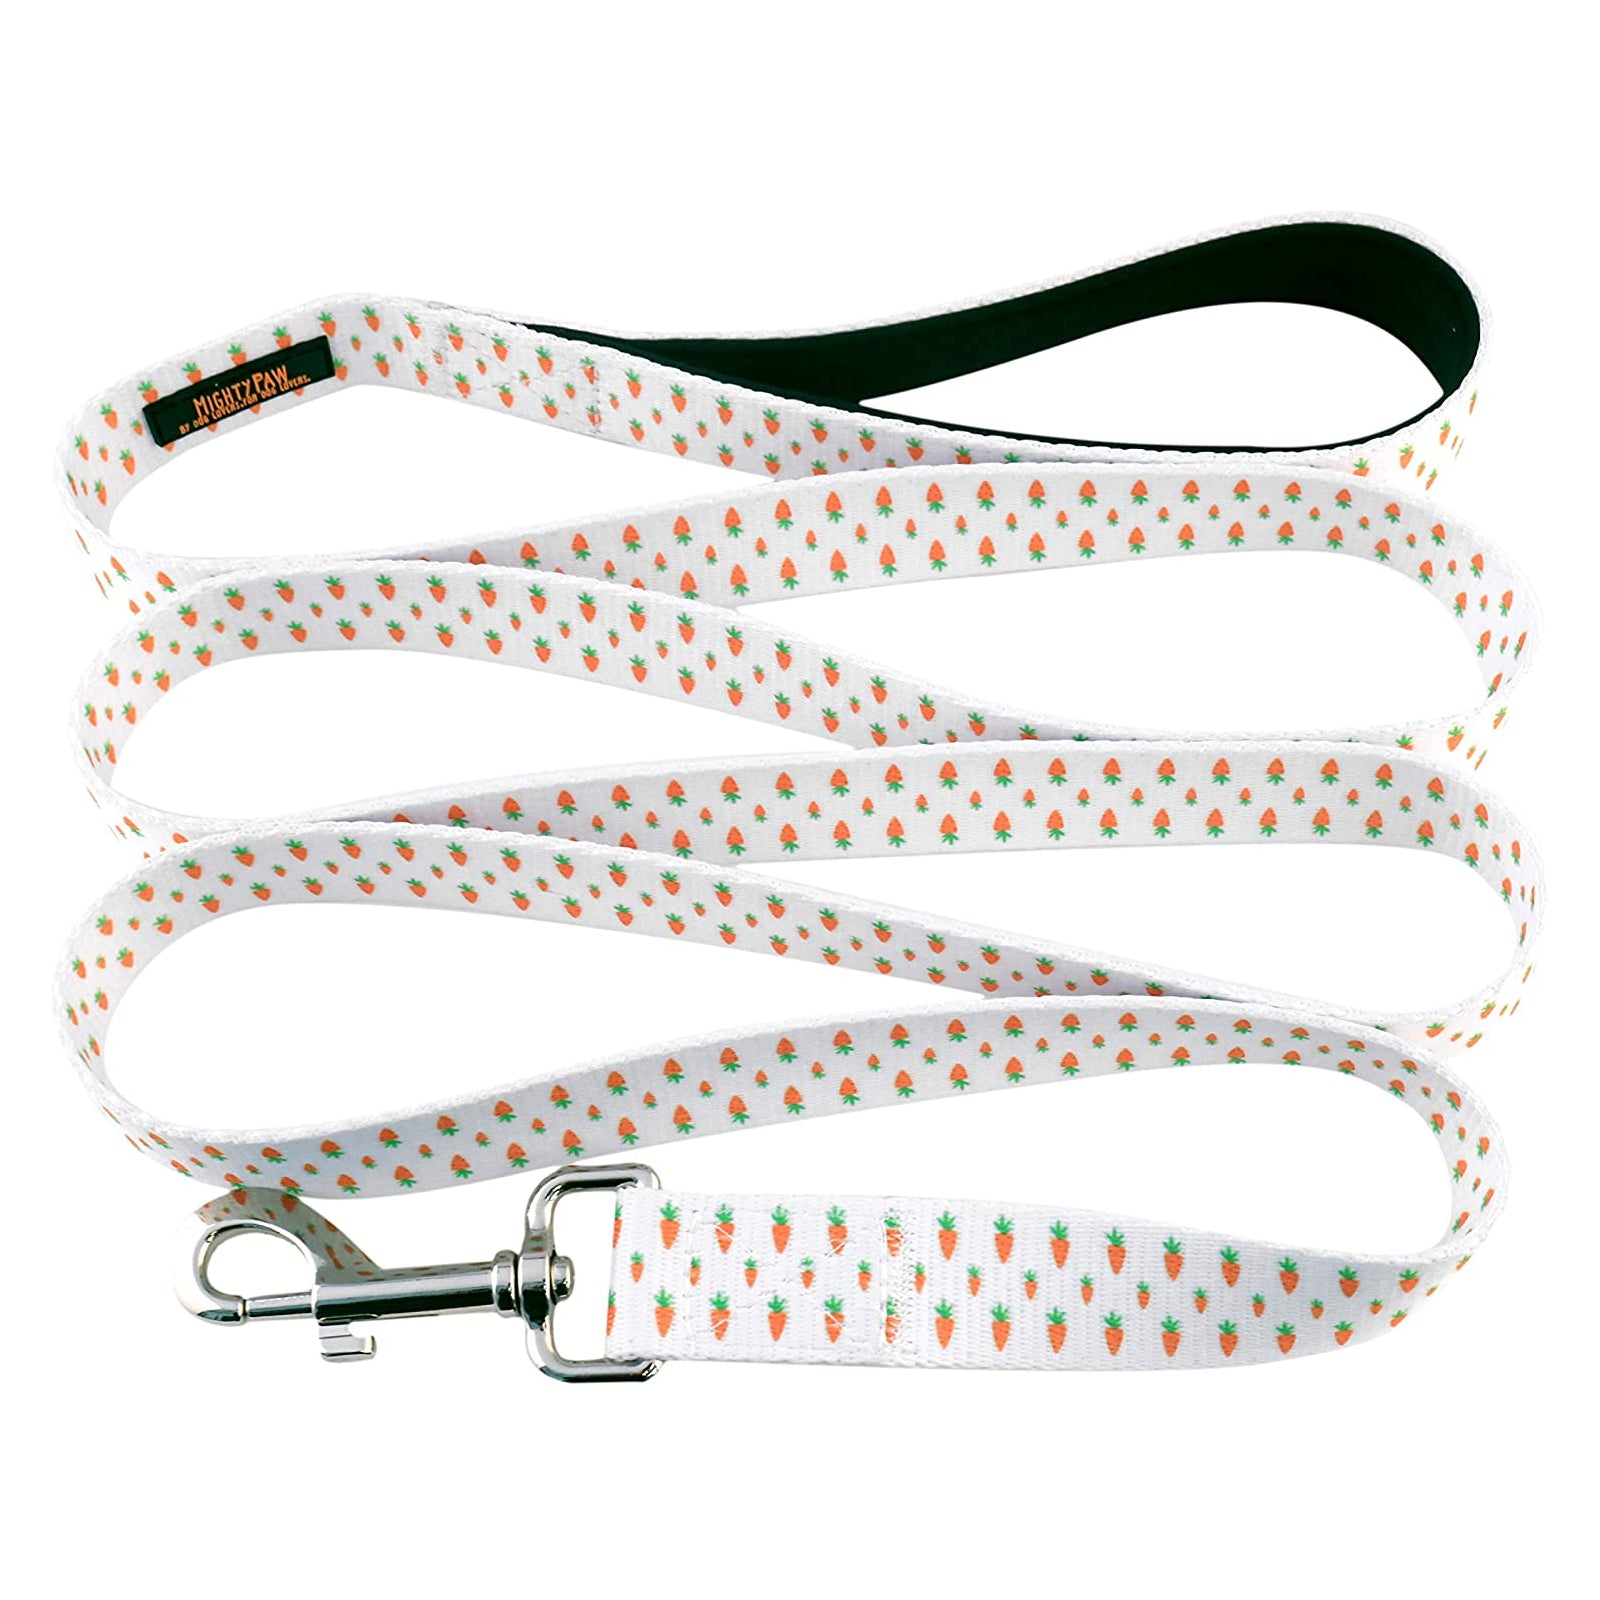 Festive 6-Foot Easter Dog Leash with Durable Hardware